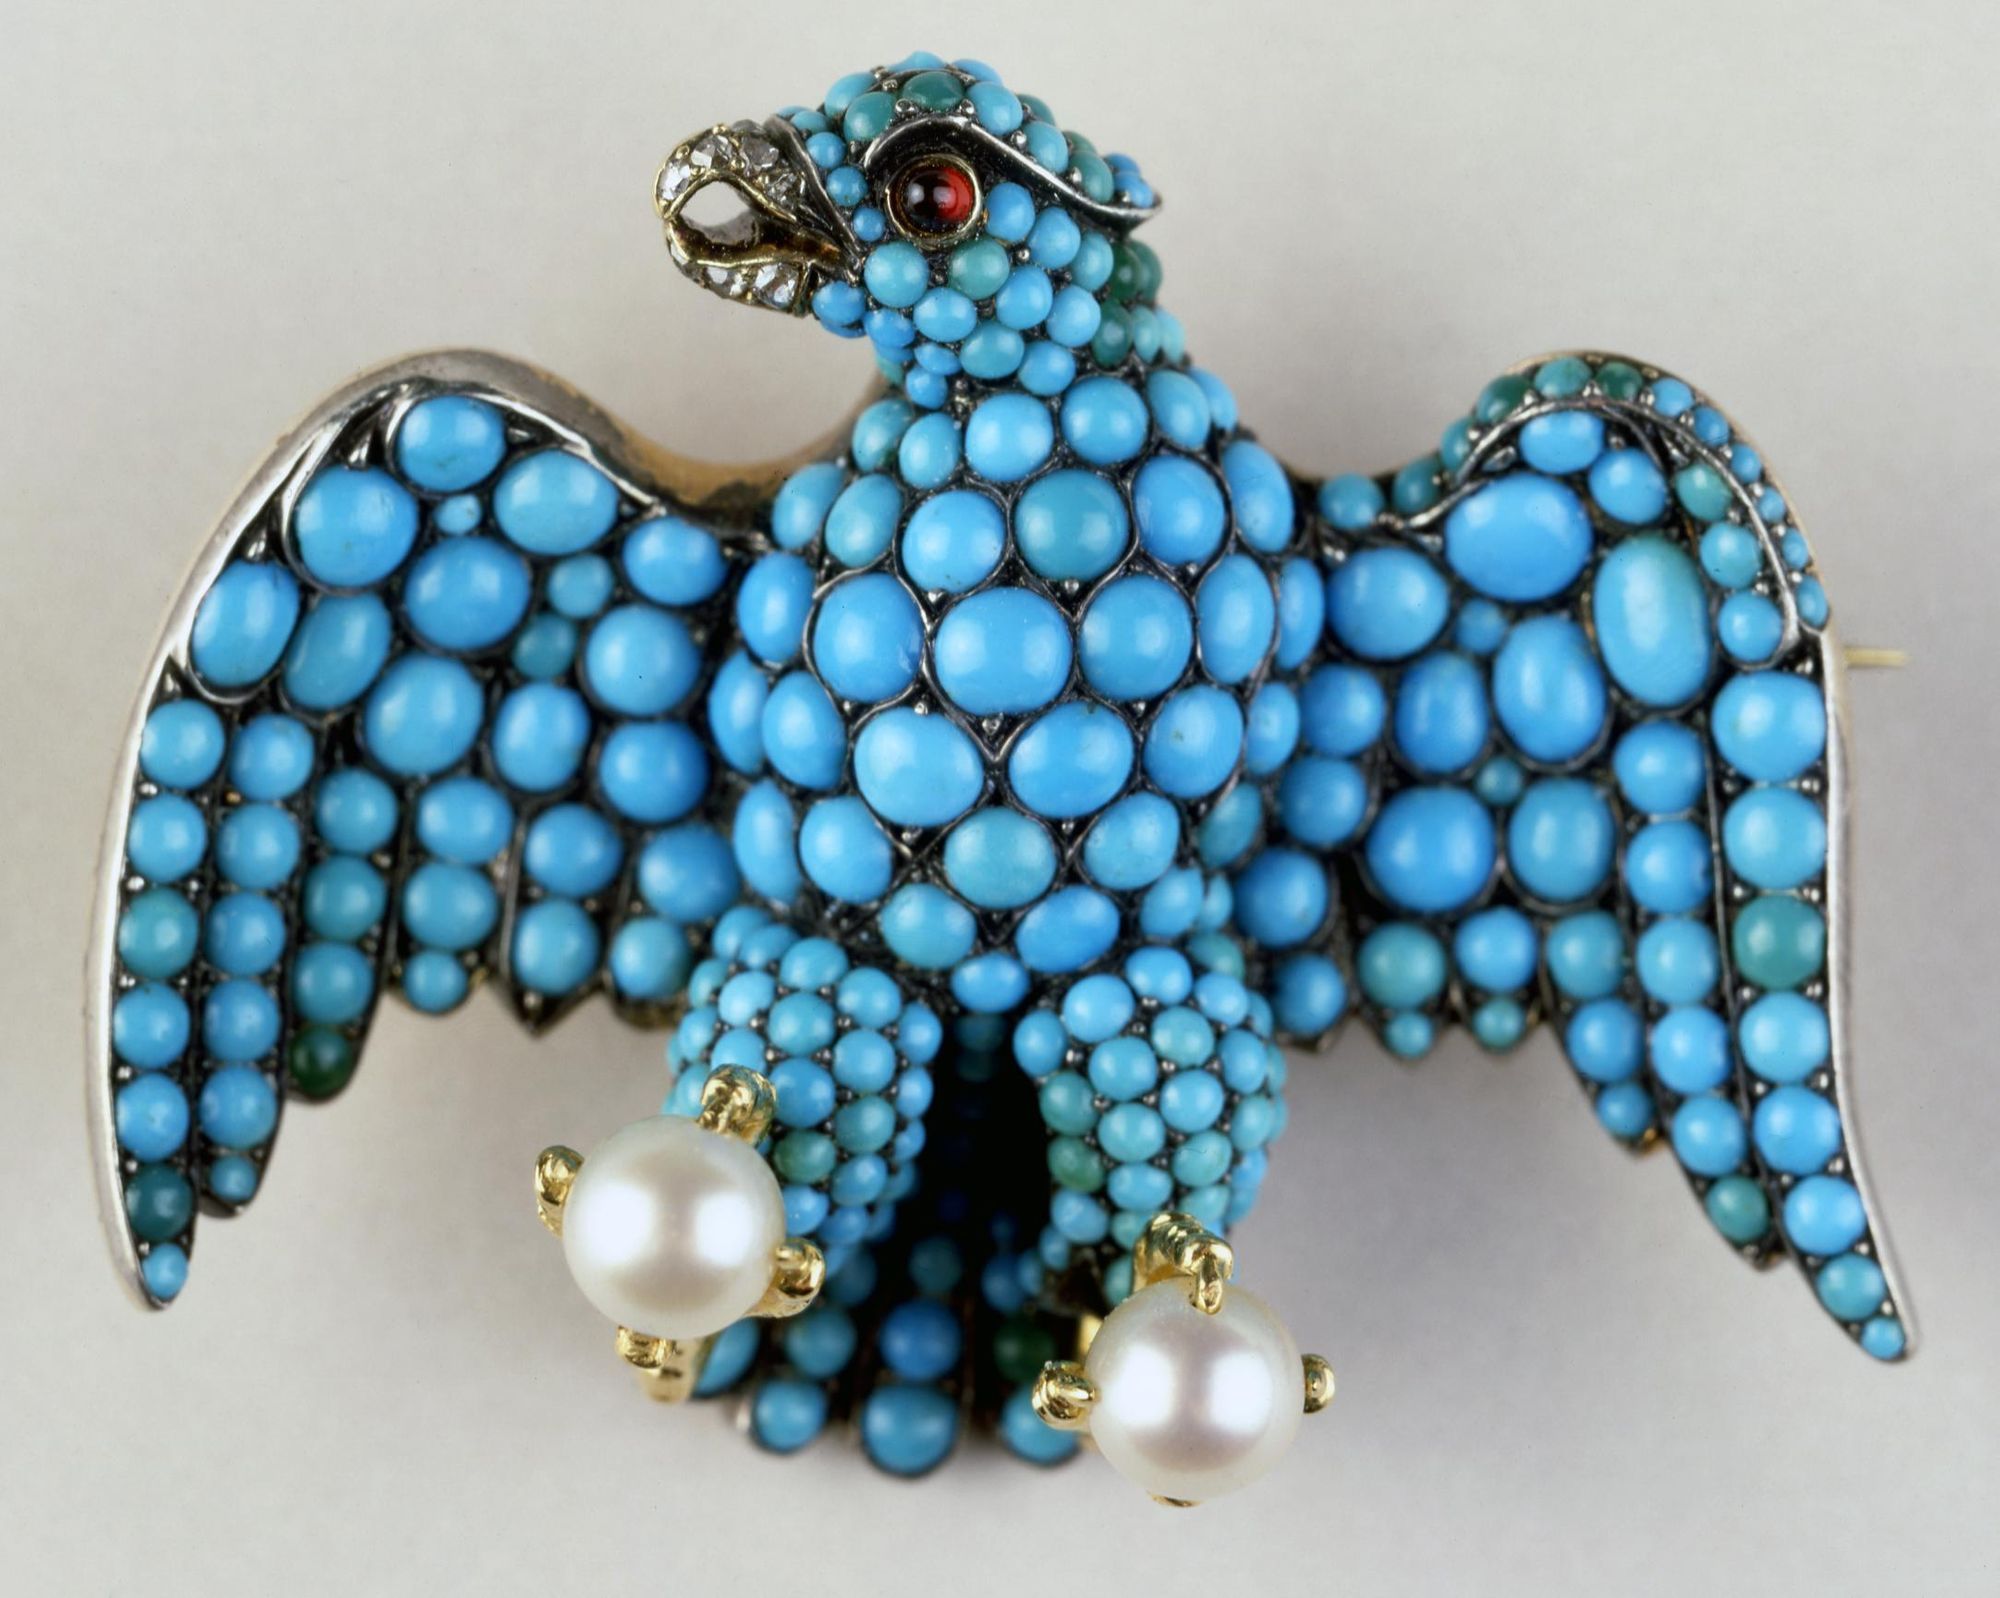 Brooch in the form of the Coburg eagle, with pave-set turquoises designed by Prince Albert given to the Queen Victoria's train bearers. In the collection of the British Museum